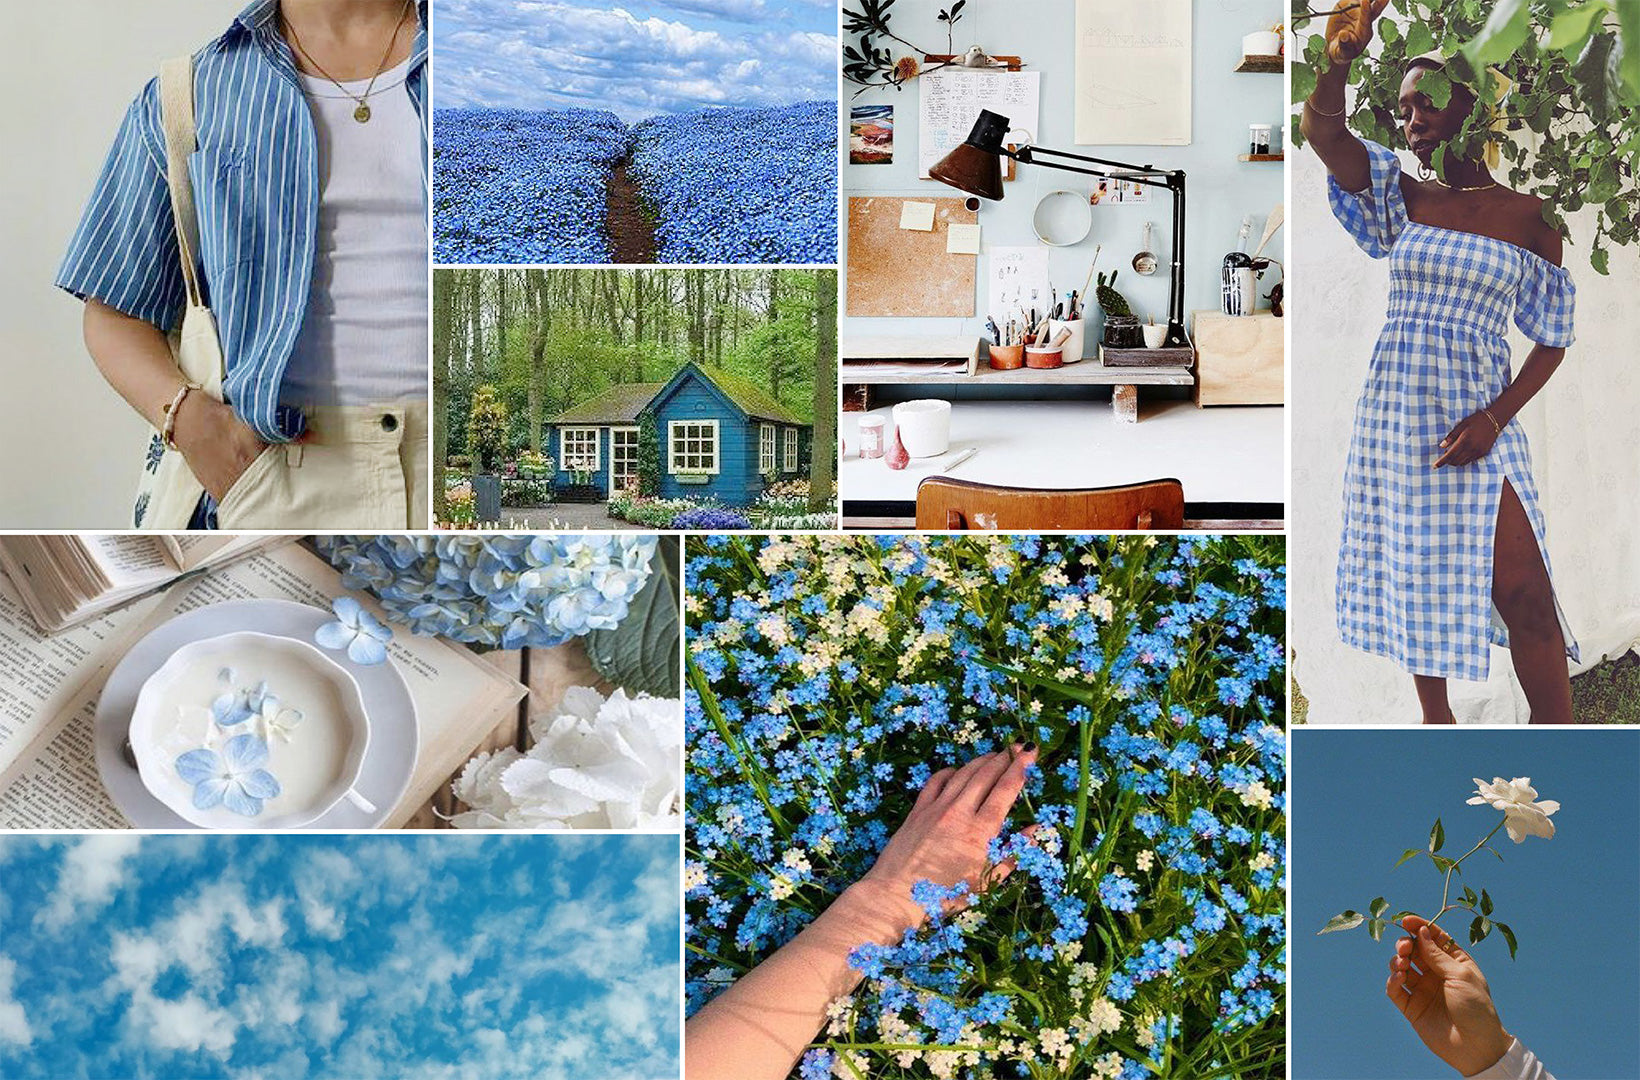 A collage of Atlas Blue inspiration images shoes a blue sky, filed of flowers, blue gingham and denim, and wooded scenes.